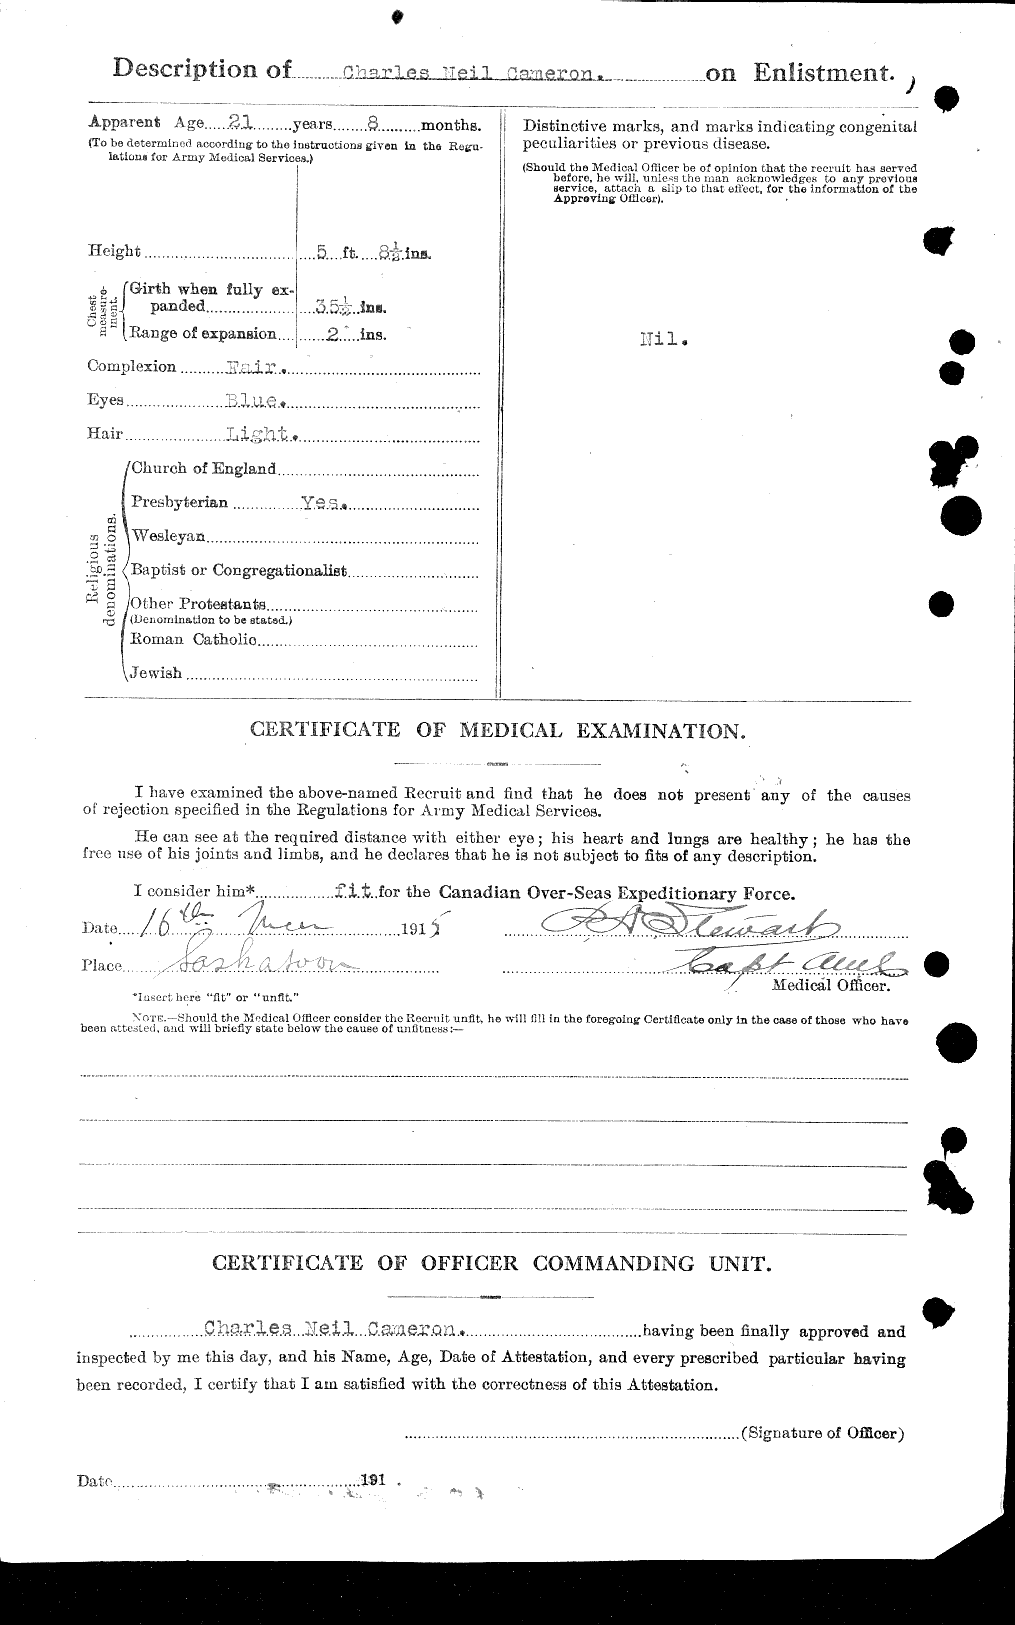 Personnel Records of the First World War - CEF 002616b